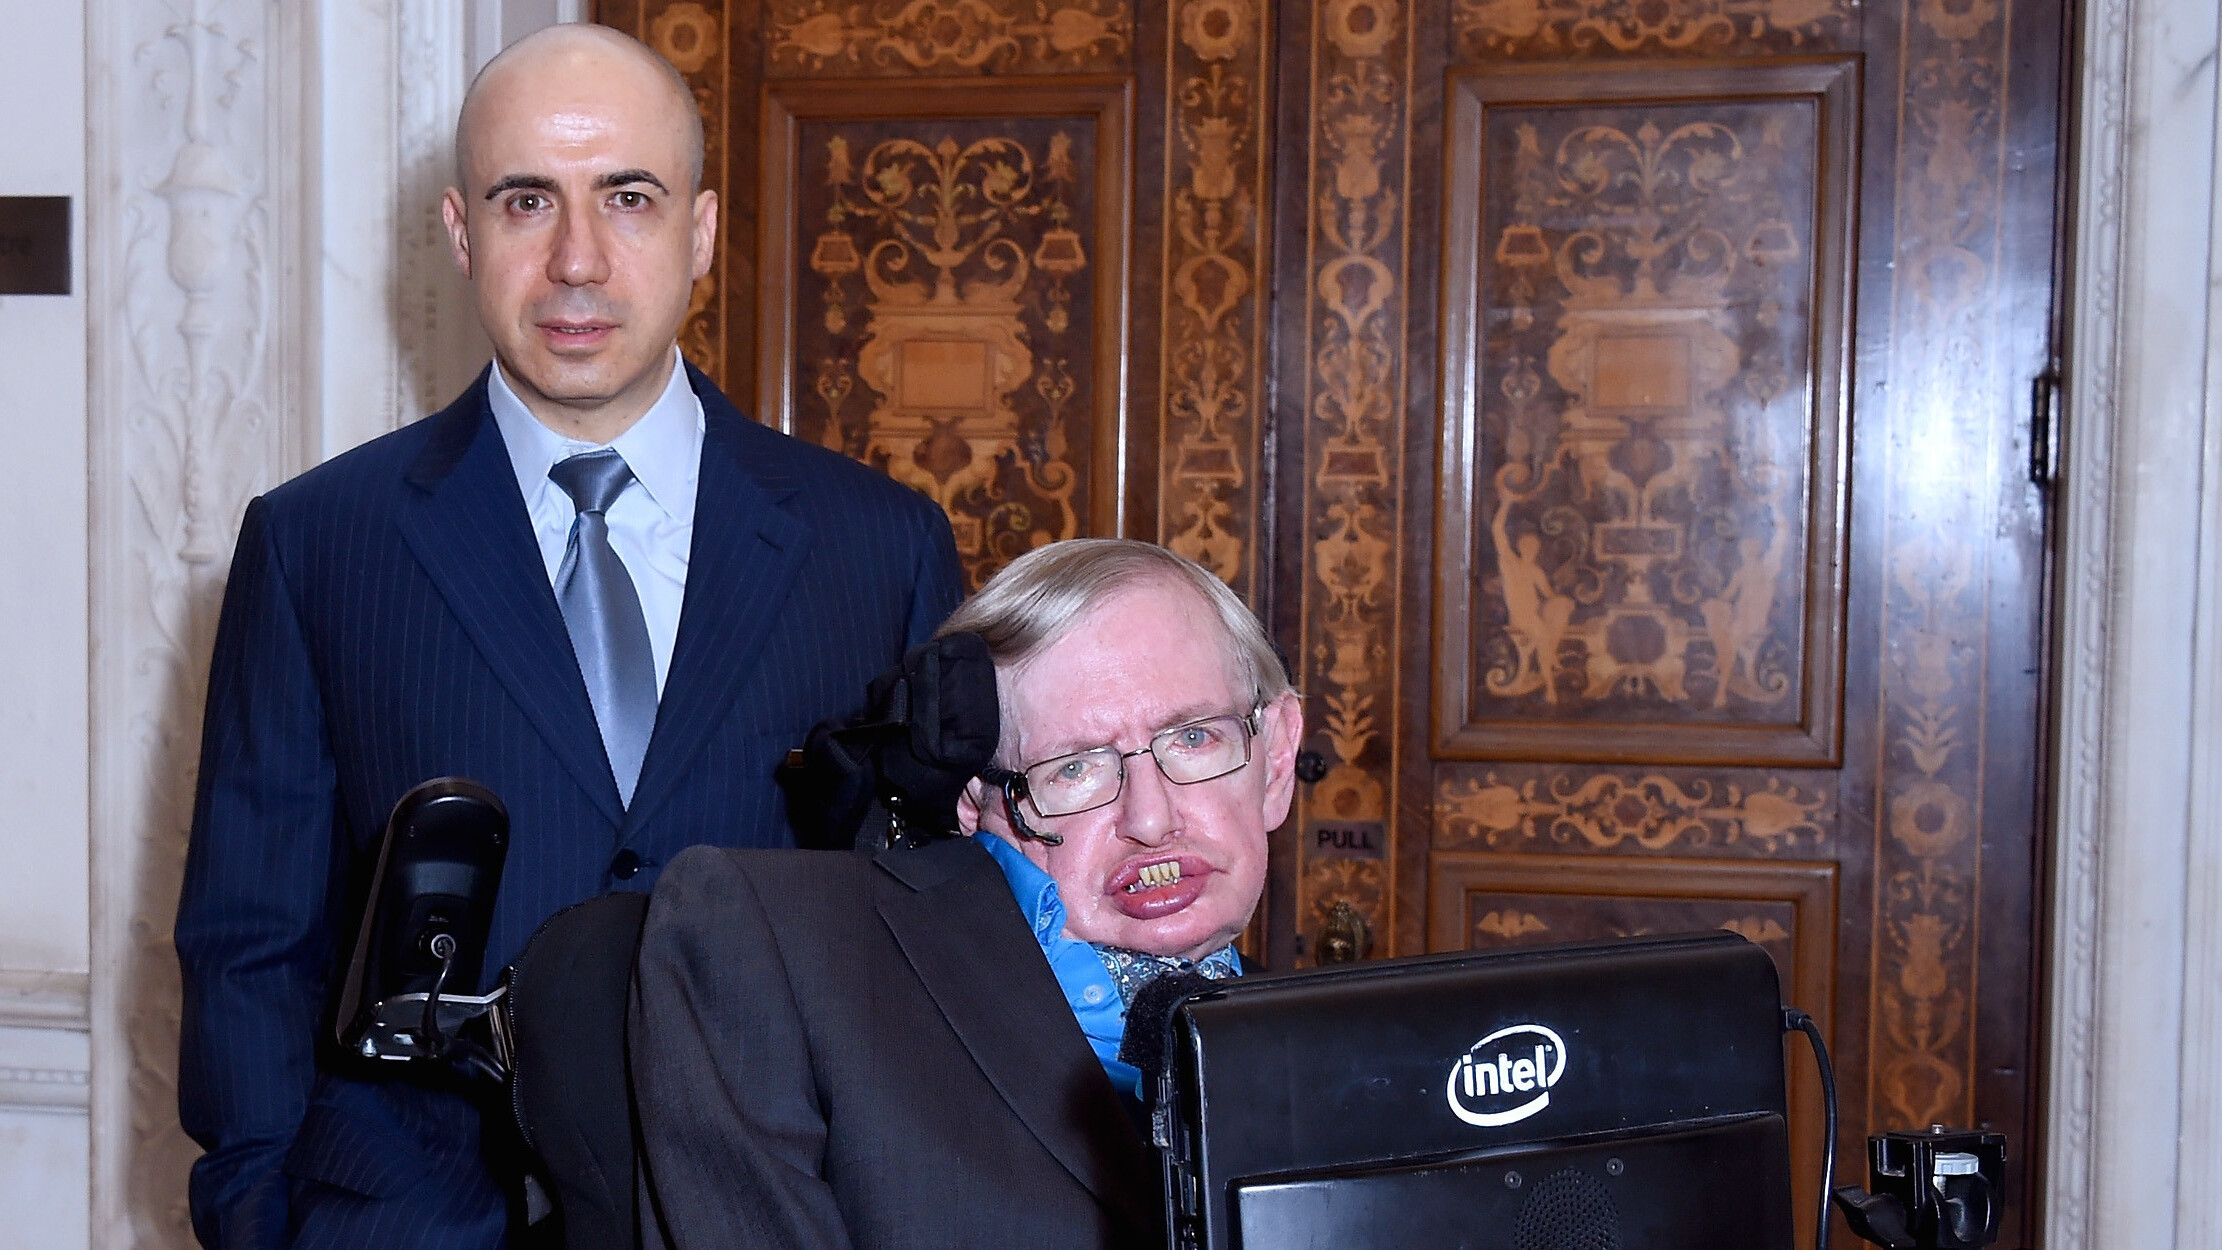 We’re finally listening for alien messages properly thanks to Stephen Hawking, Yuri Milner and $100 million